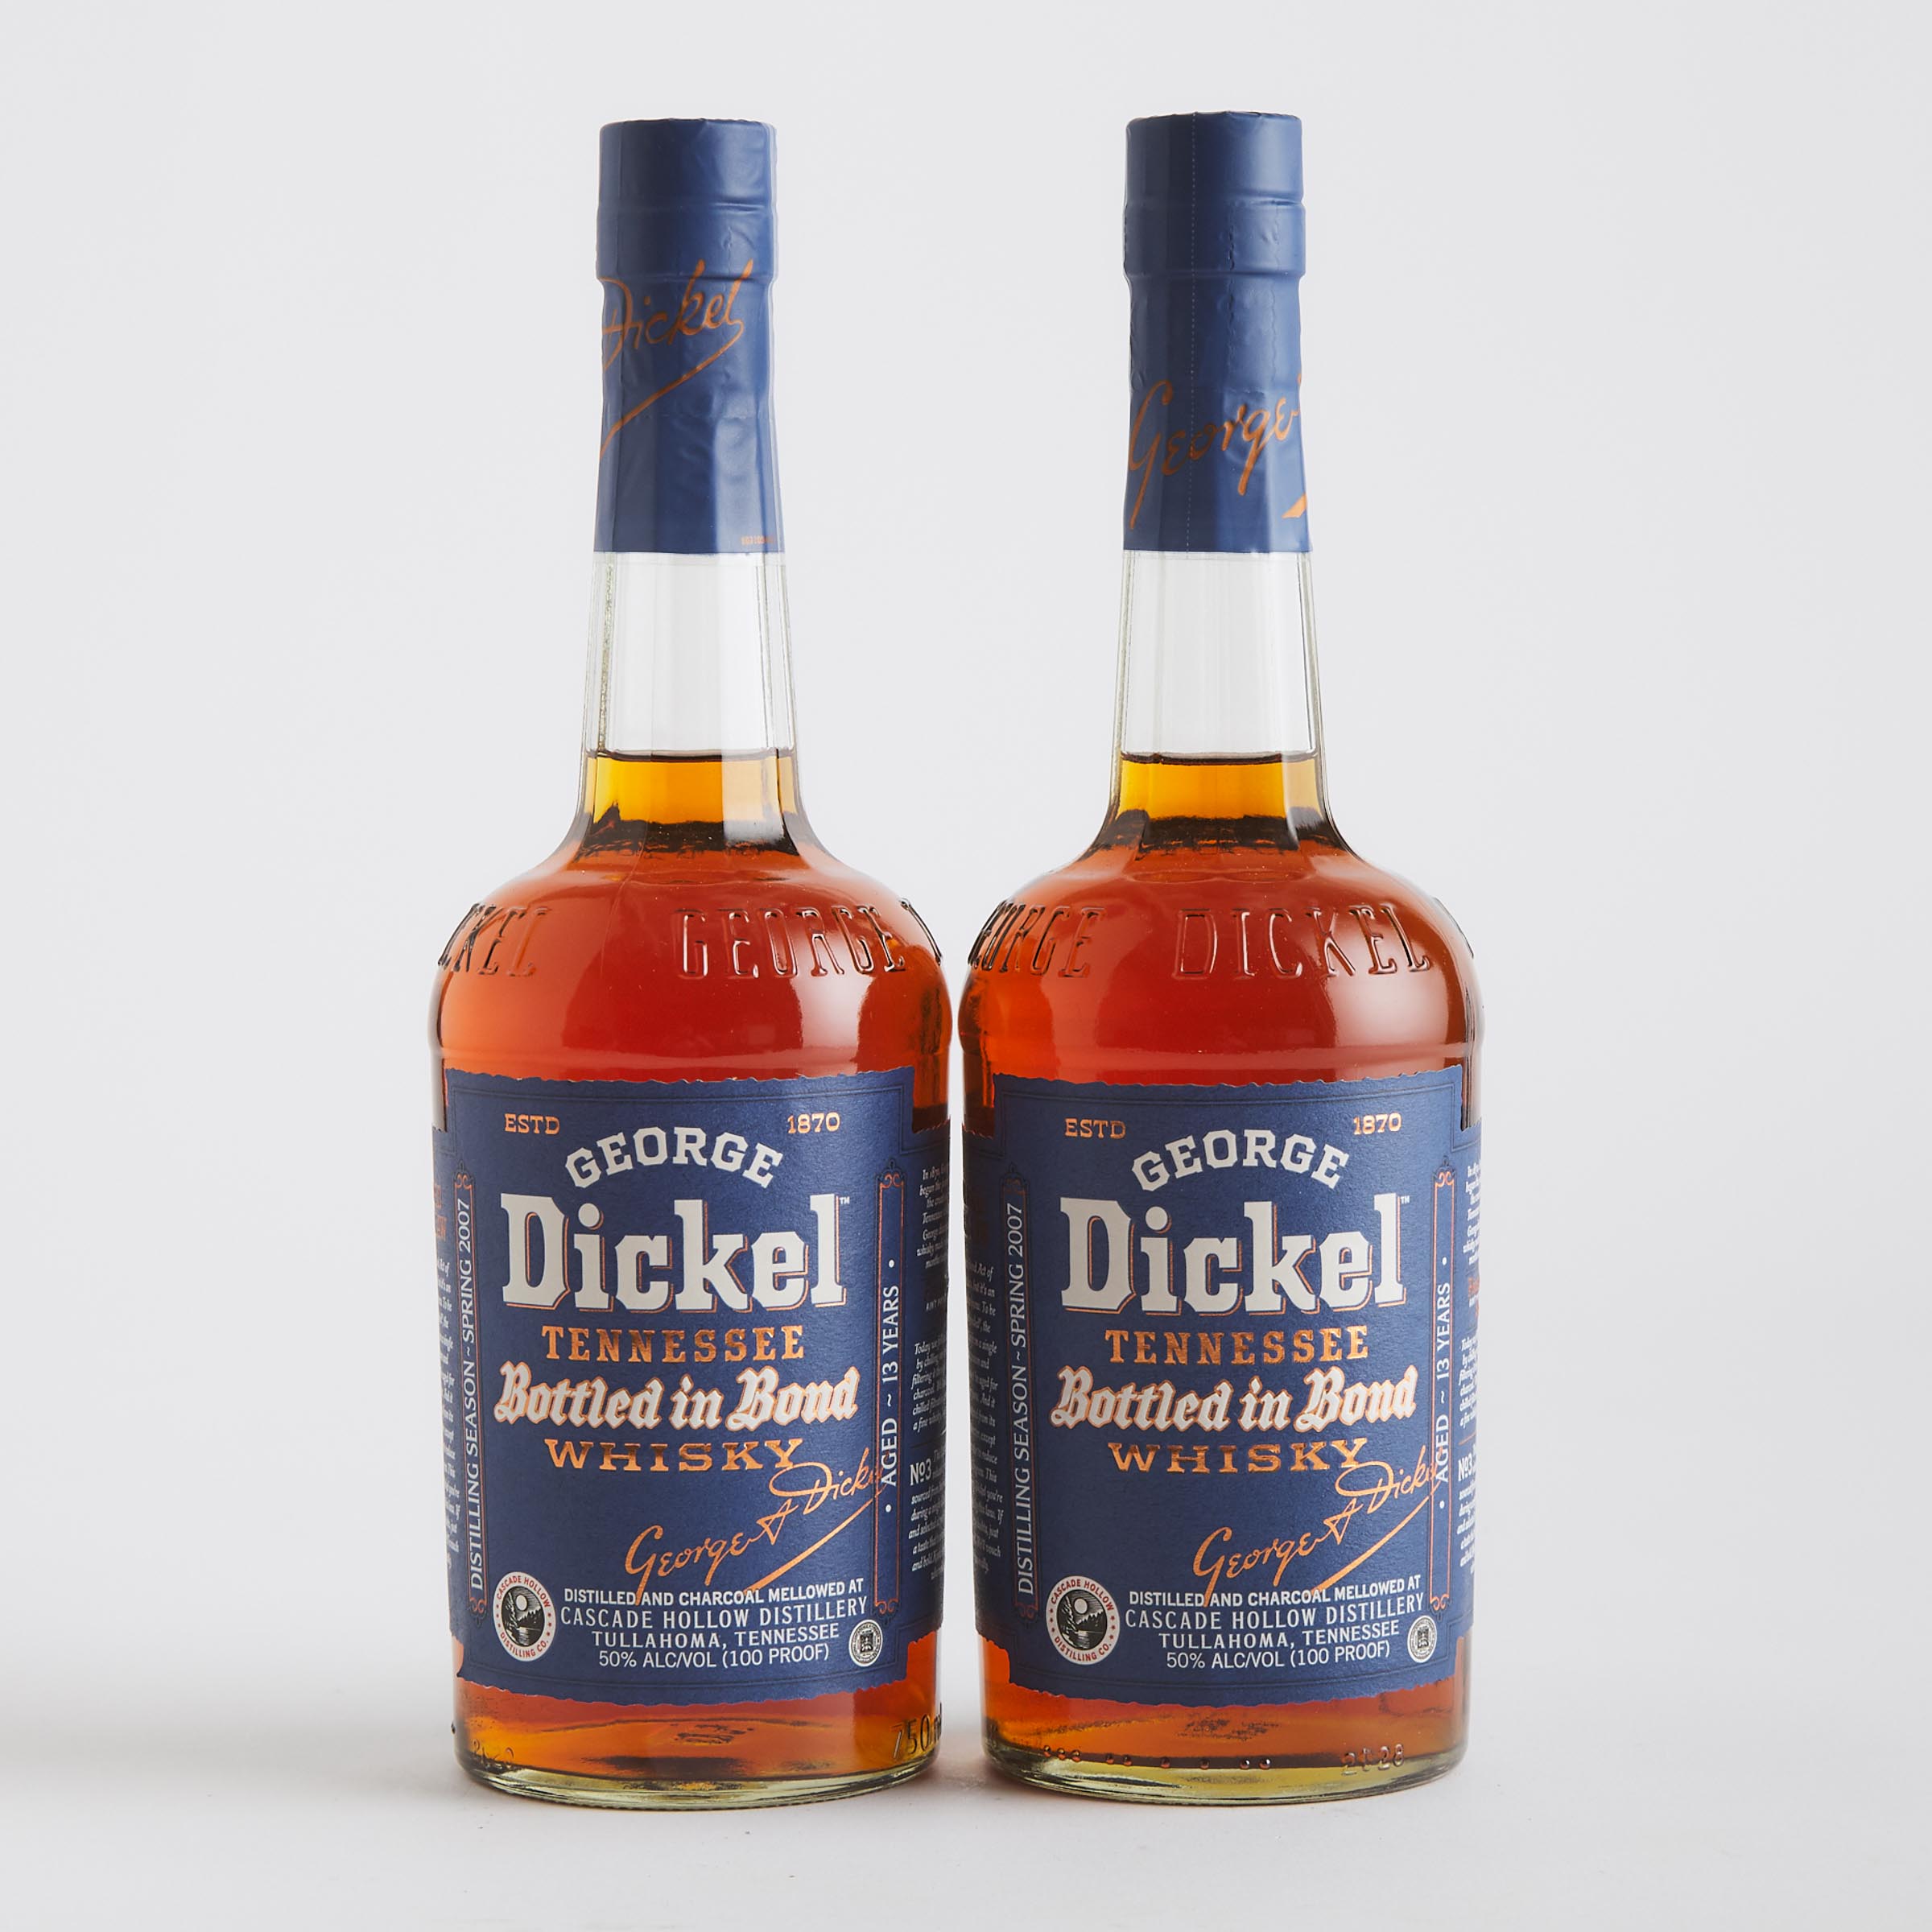 GEORGE DICKEL TENNESSEE WHISKY 13 YEARS (TWO 750 ML)